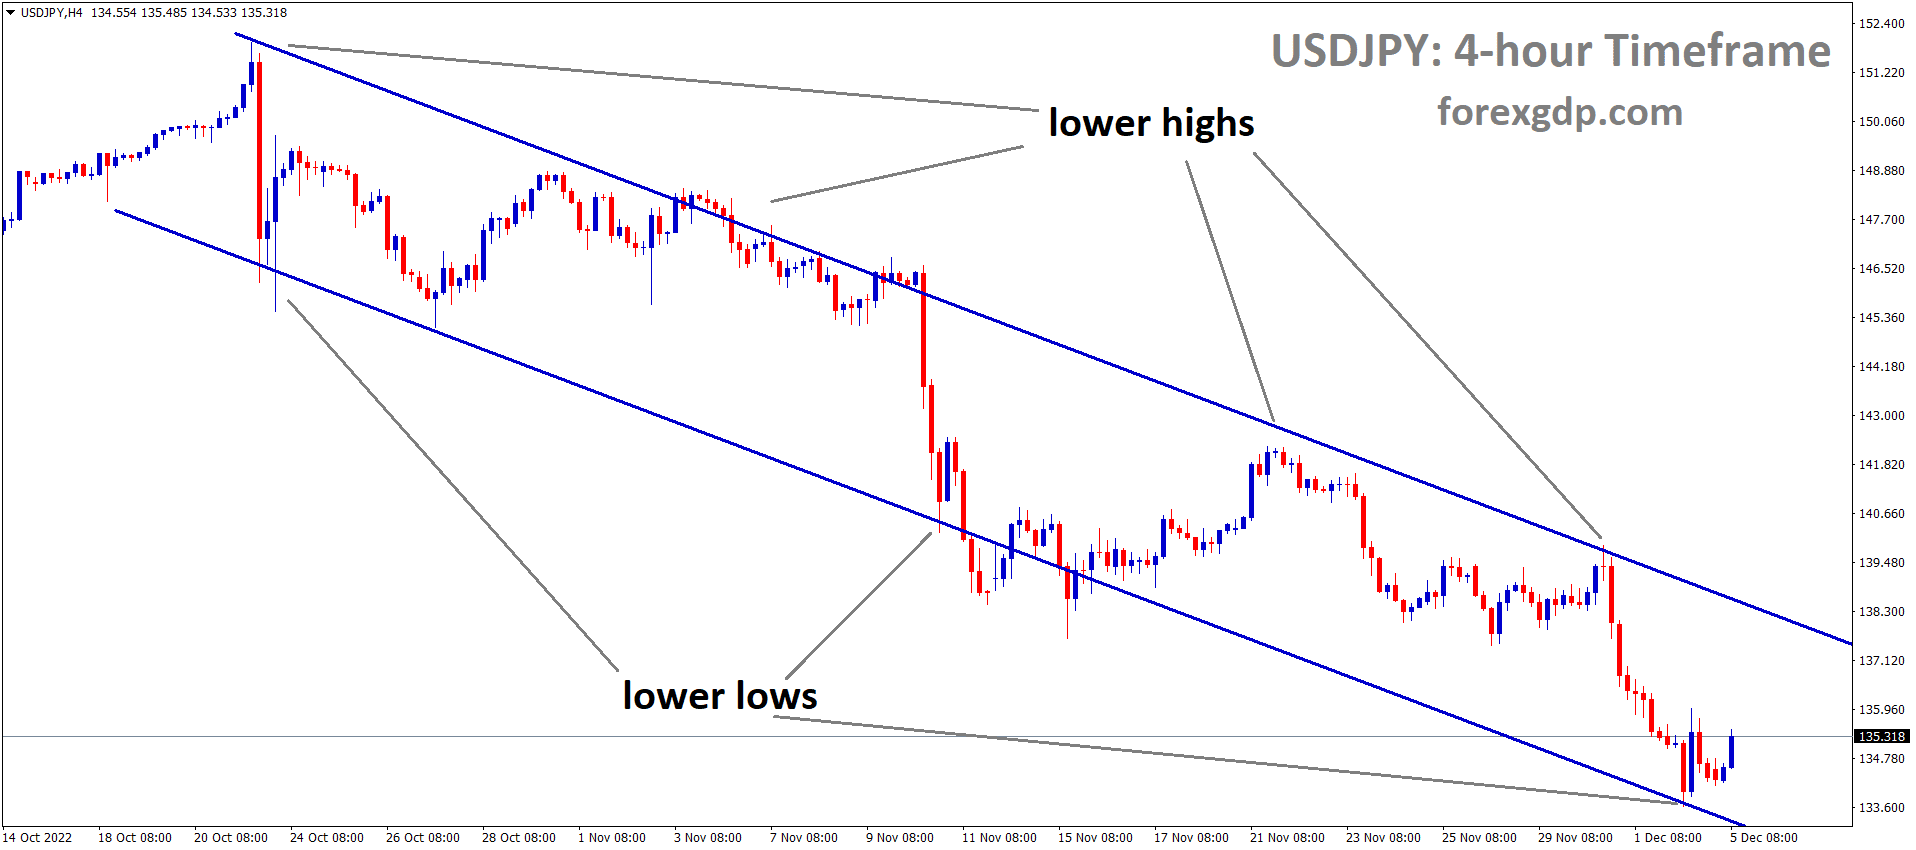 USDJPY is moving in the Descending channel and the market has rebounded from the lower low area of the channel